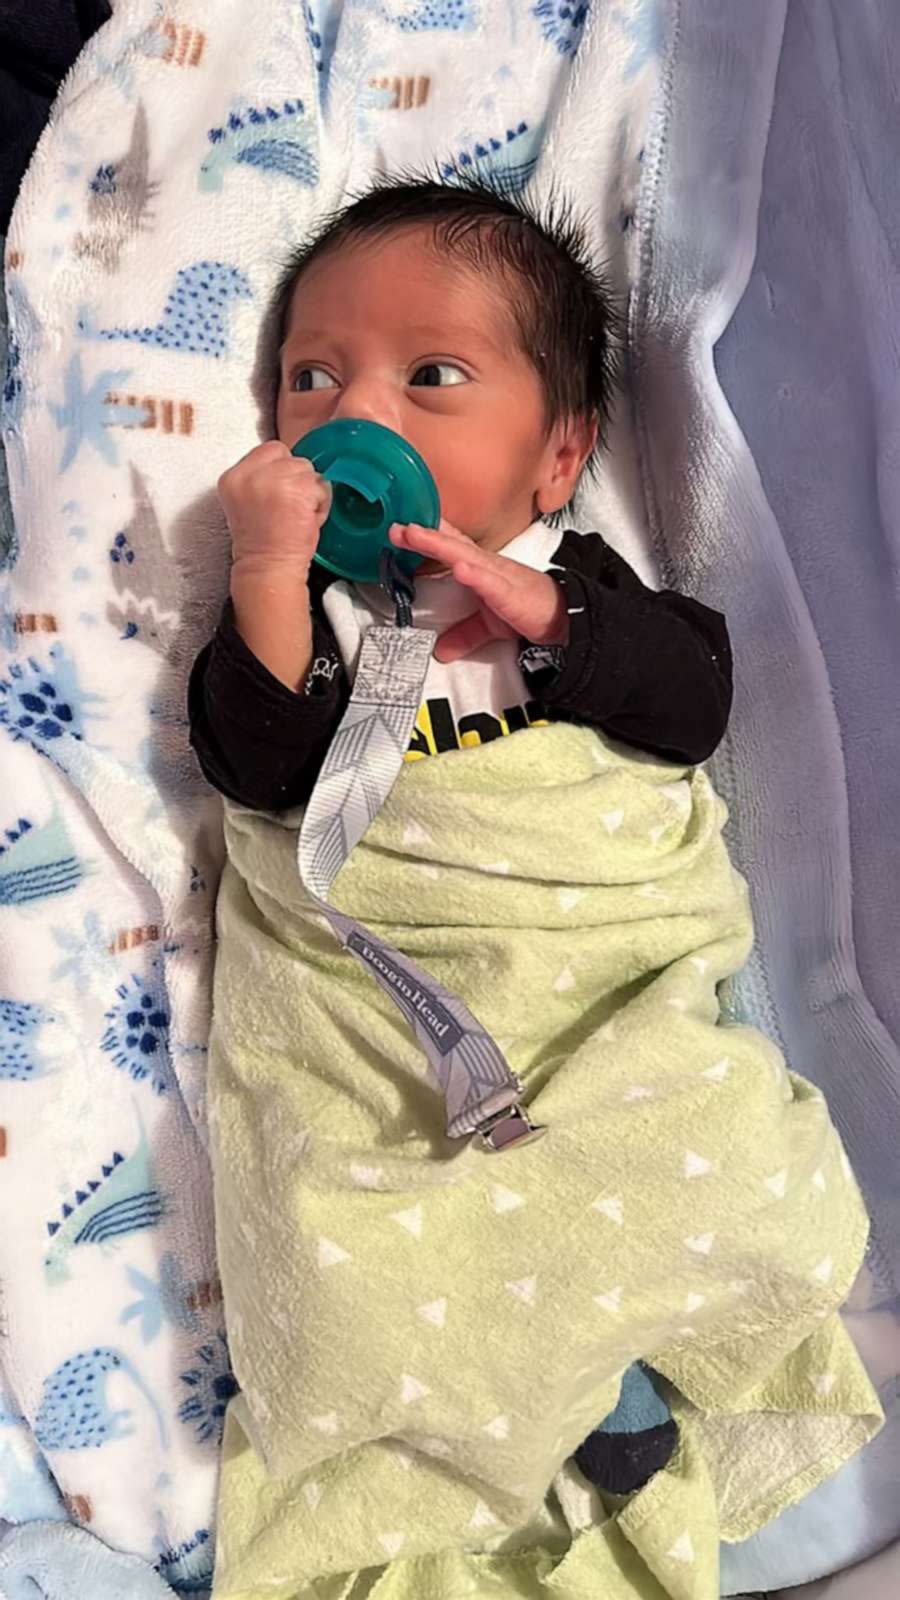 PHOTO: The baby born on the way to the hospital in New Mexico on July 24, 2023, was saved by the quick actions of a New Mexico State police officer. (Courtesy Covarrubias Family)